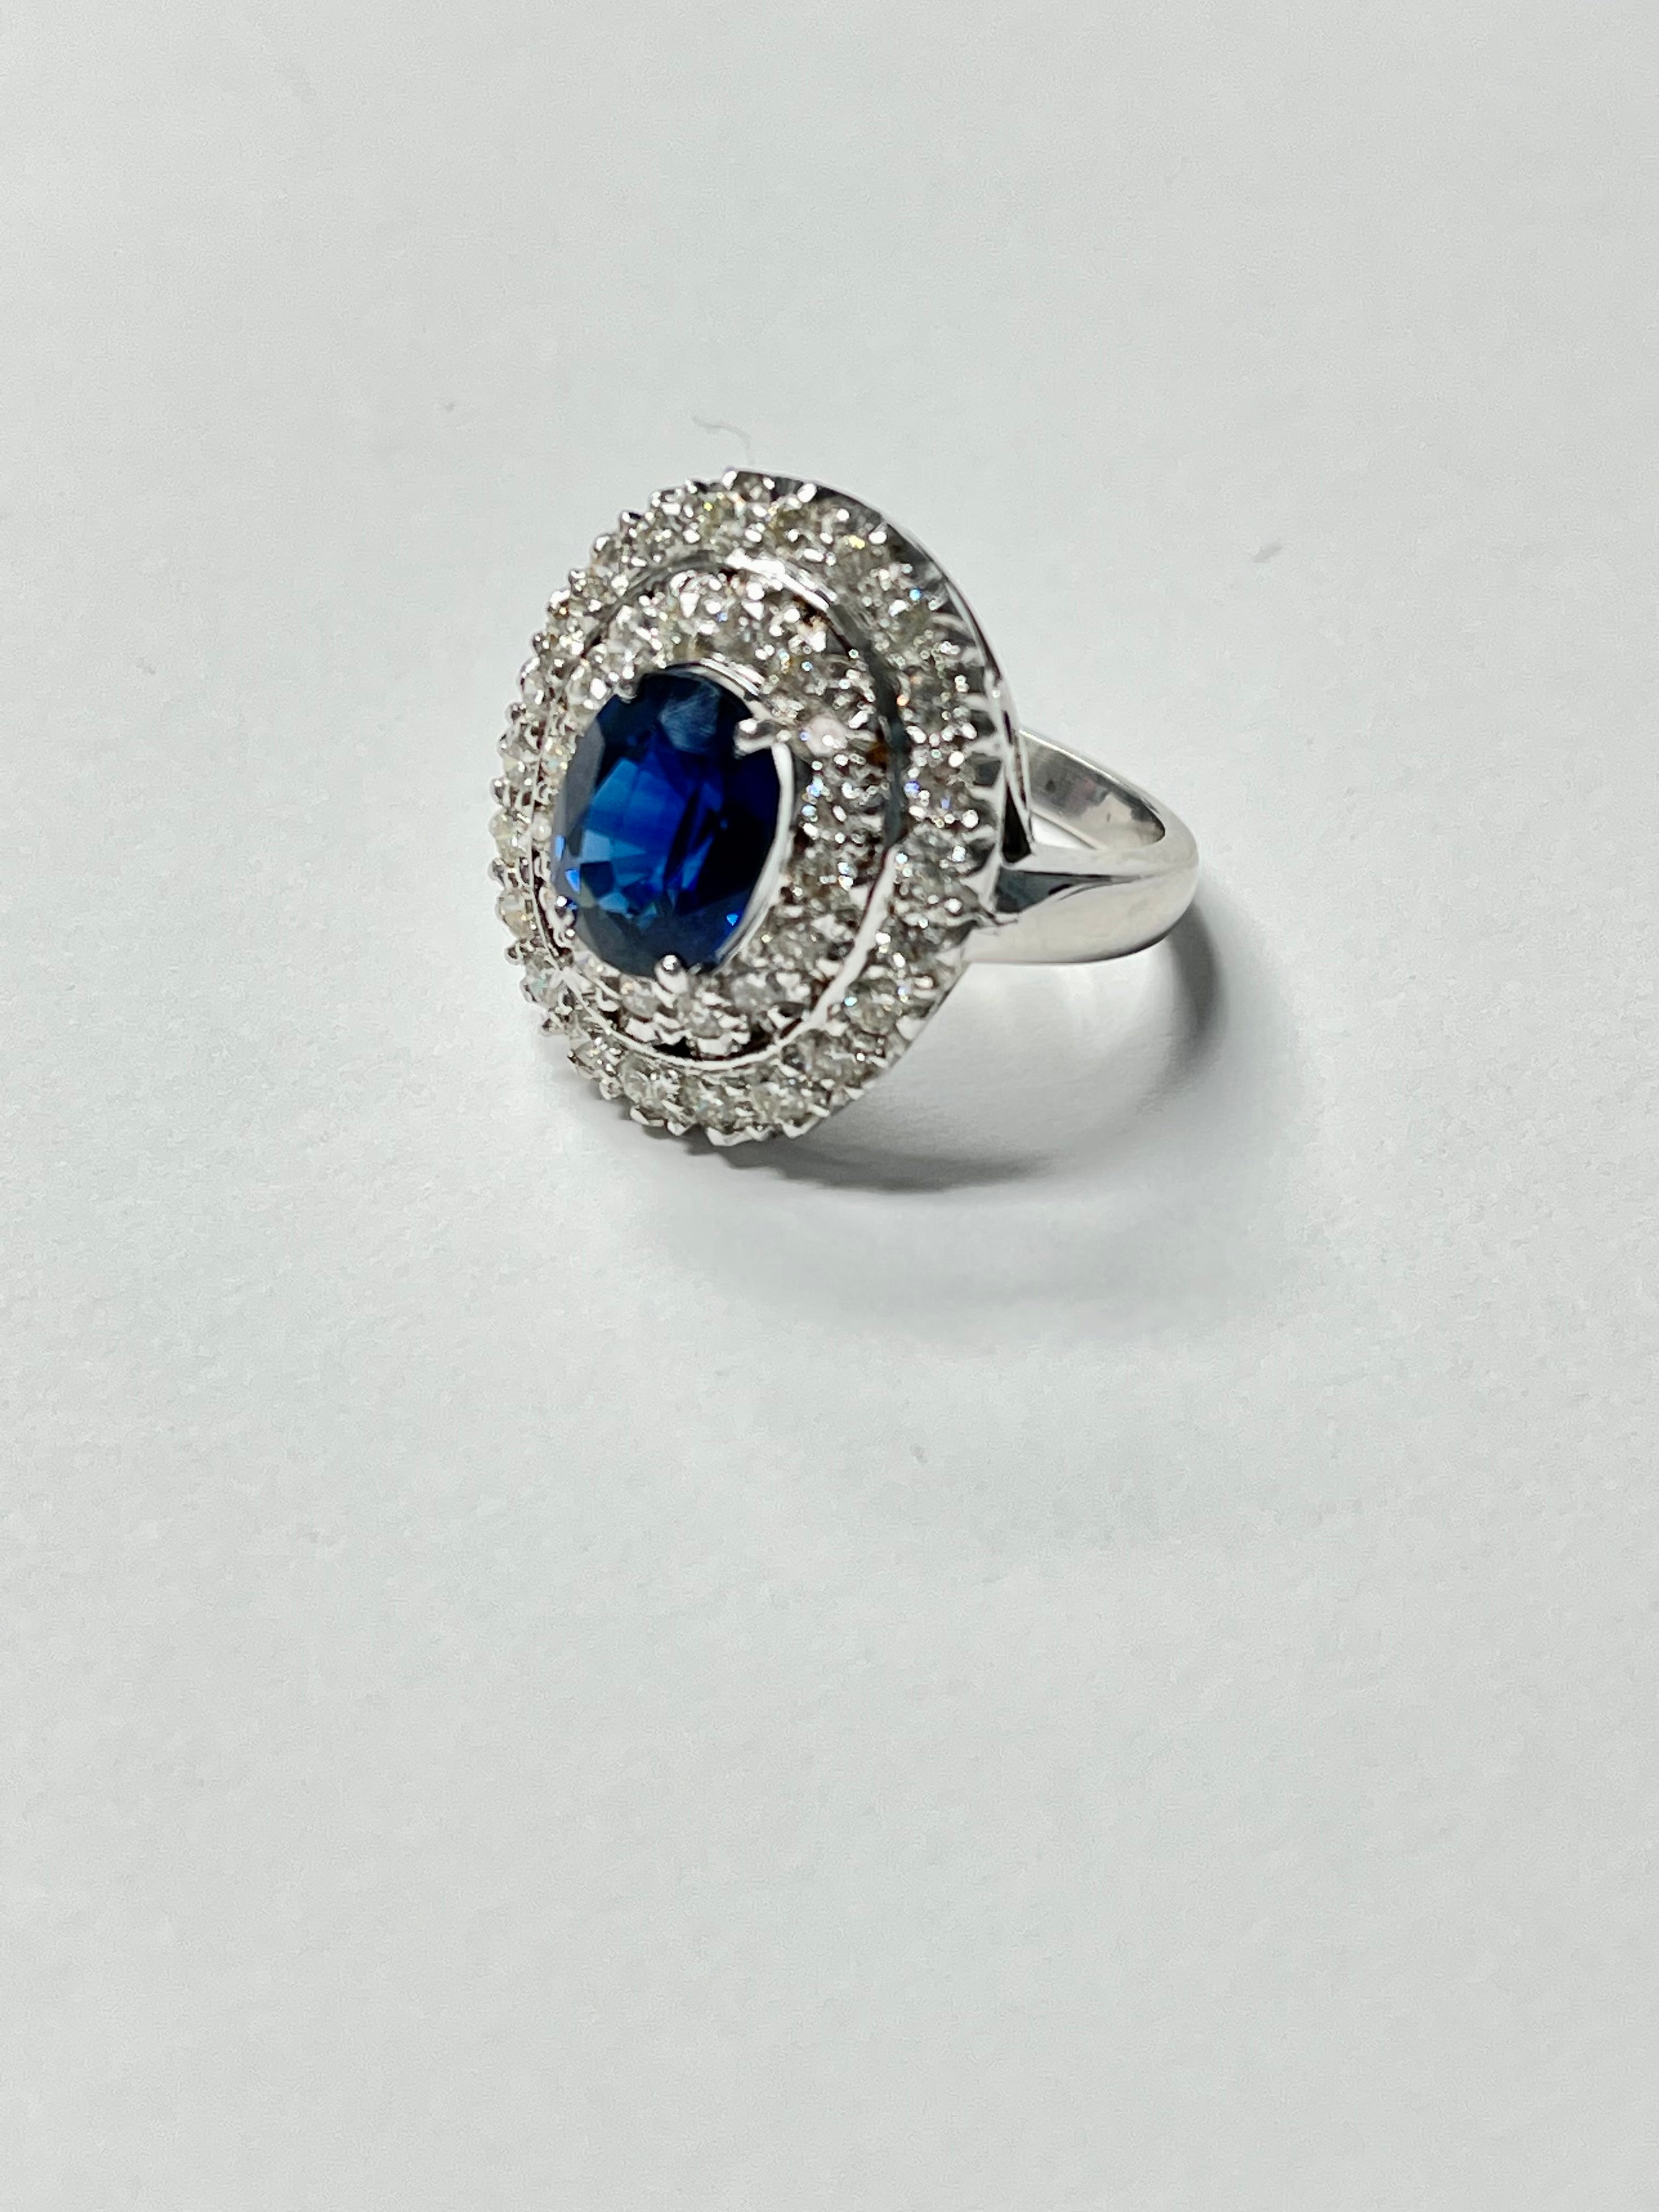 Blue sapphire and diamond engagement ring beautifully handcrafted in 18k White Gold. 
The details are as follows : 
Blue sapphire weight : 3.21 carat 
Diamond weight : 0.90 carat ( GH color and VS clarity ) 
Metal : 18k white gold
Gold weight : 9.21